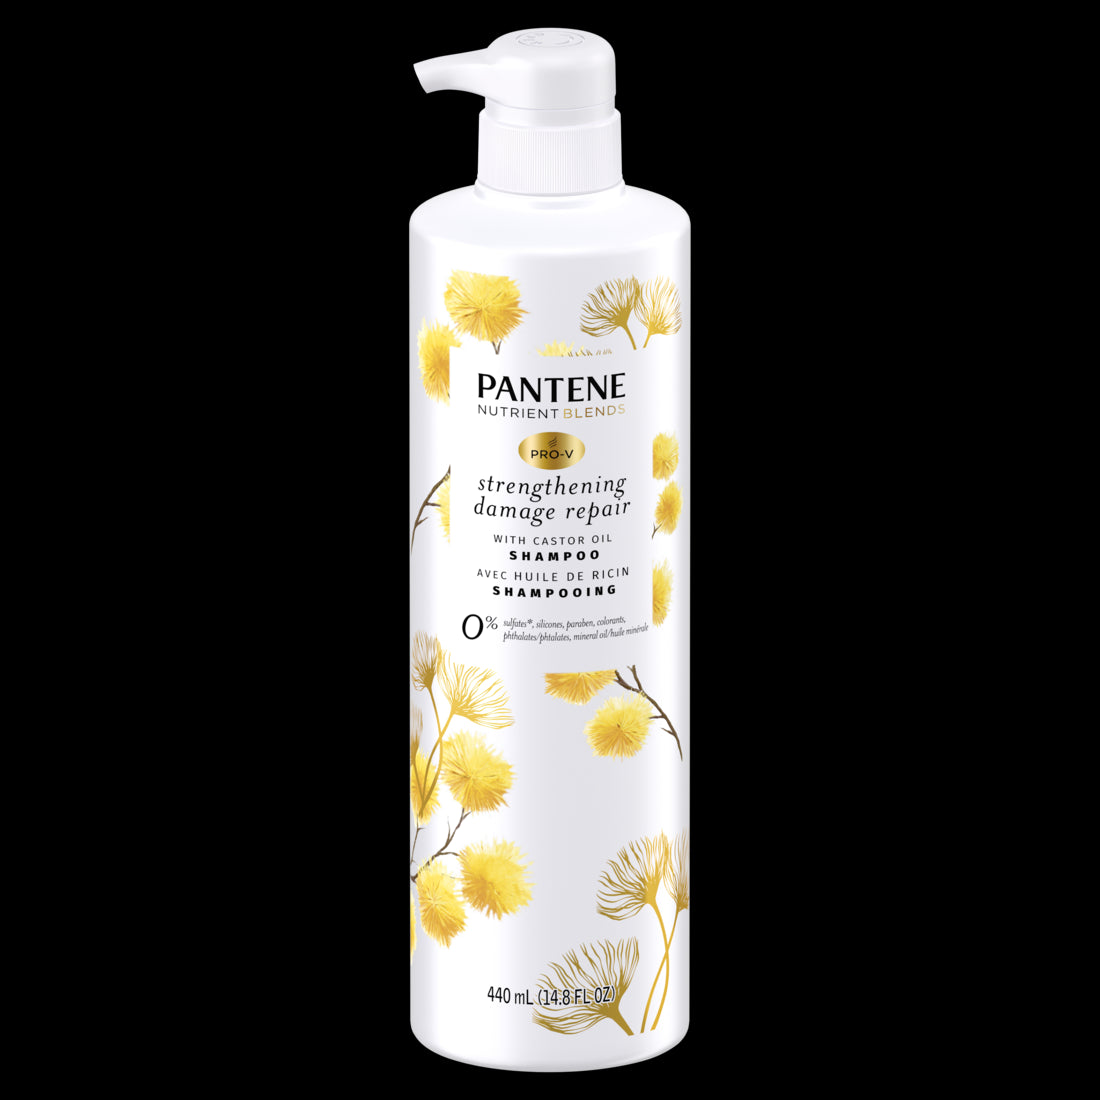 Pantene Sulfate Free Hair Strengthening Anti Frizz Damage Repair with Castor Oil Safe for Color Treated Hair Nutrient Blends Shampoo - 14.8 oz/4pk